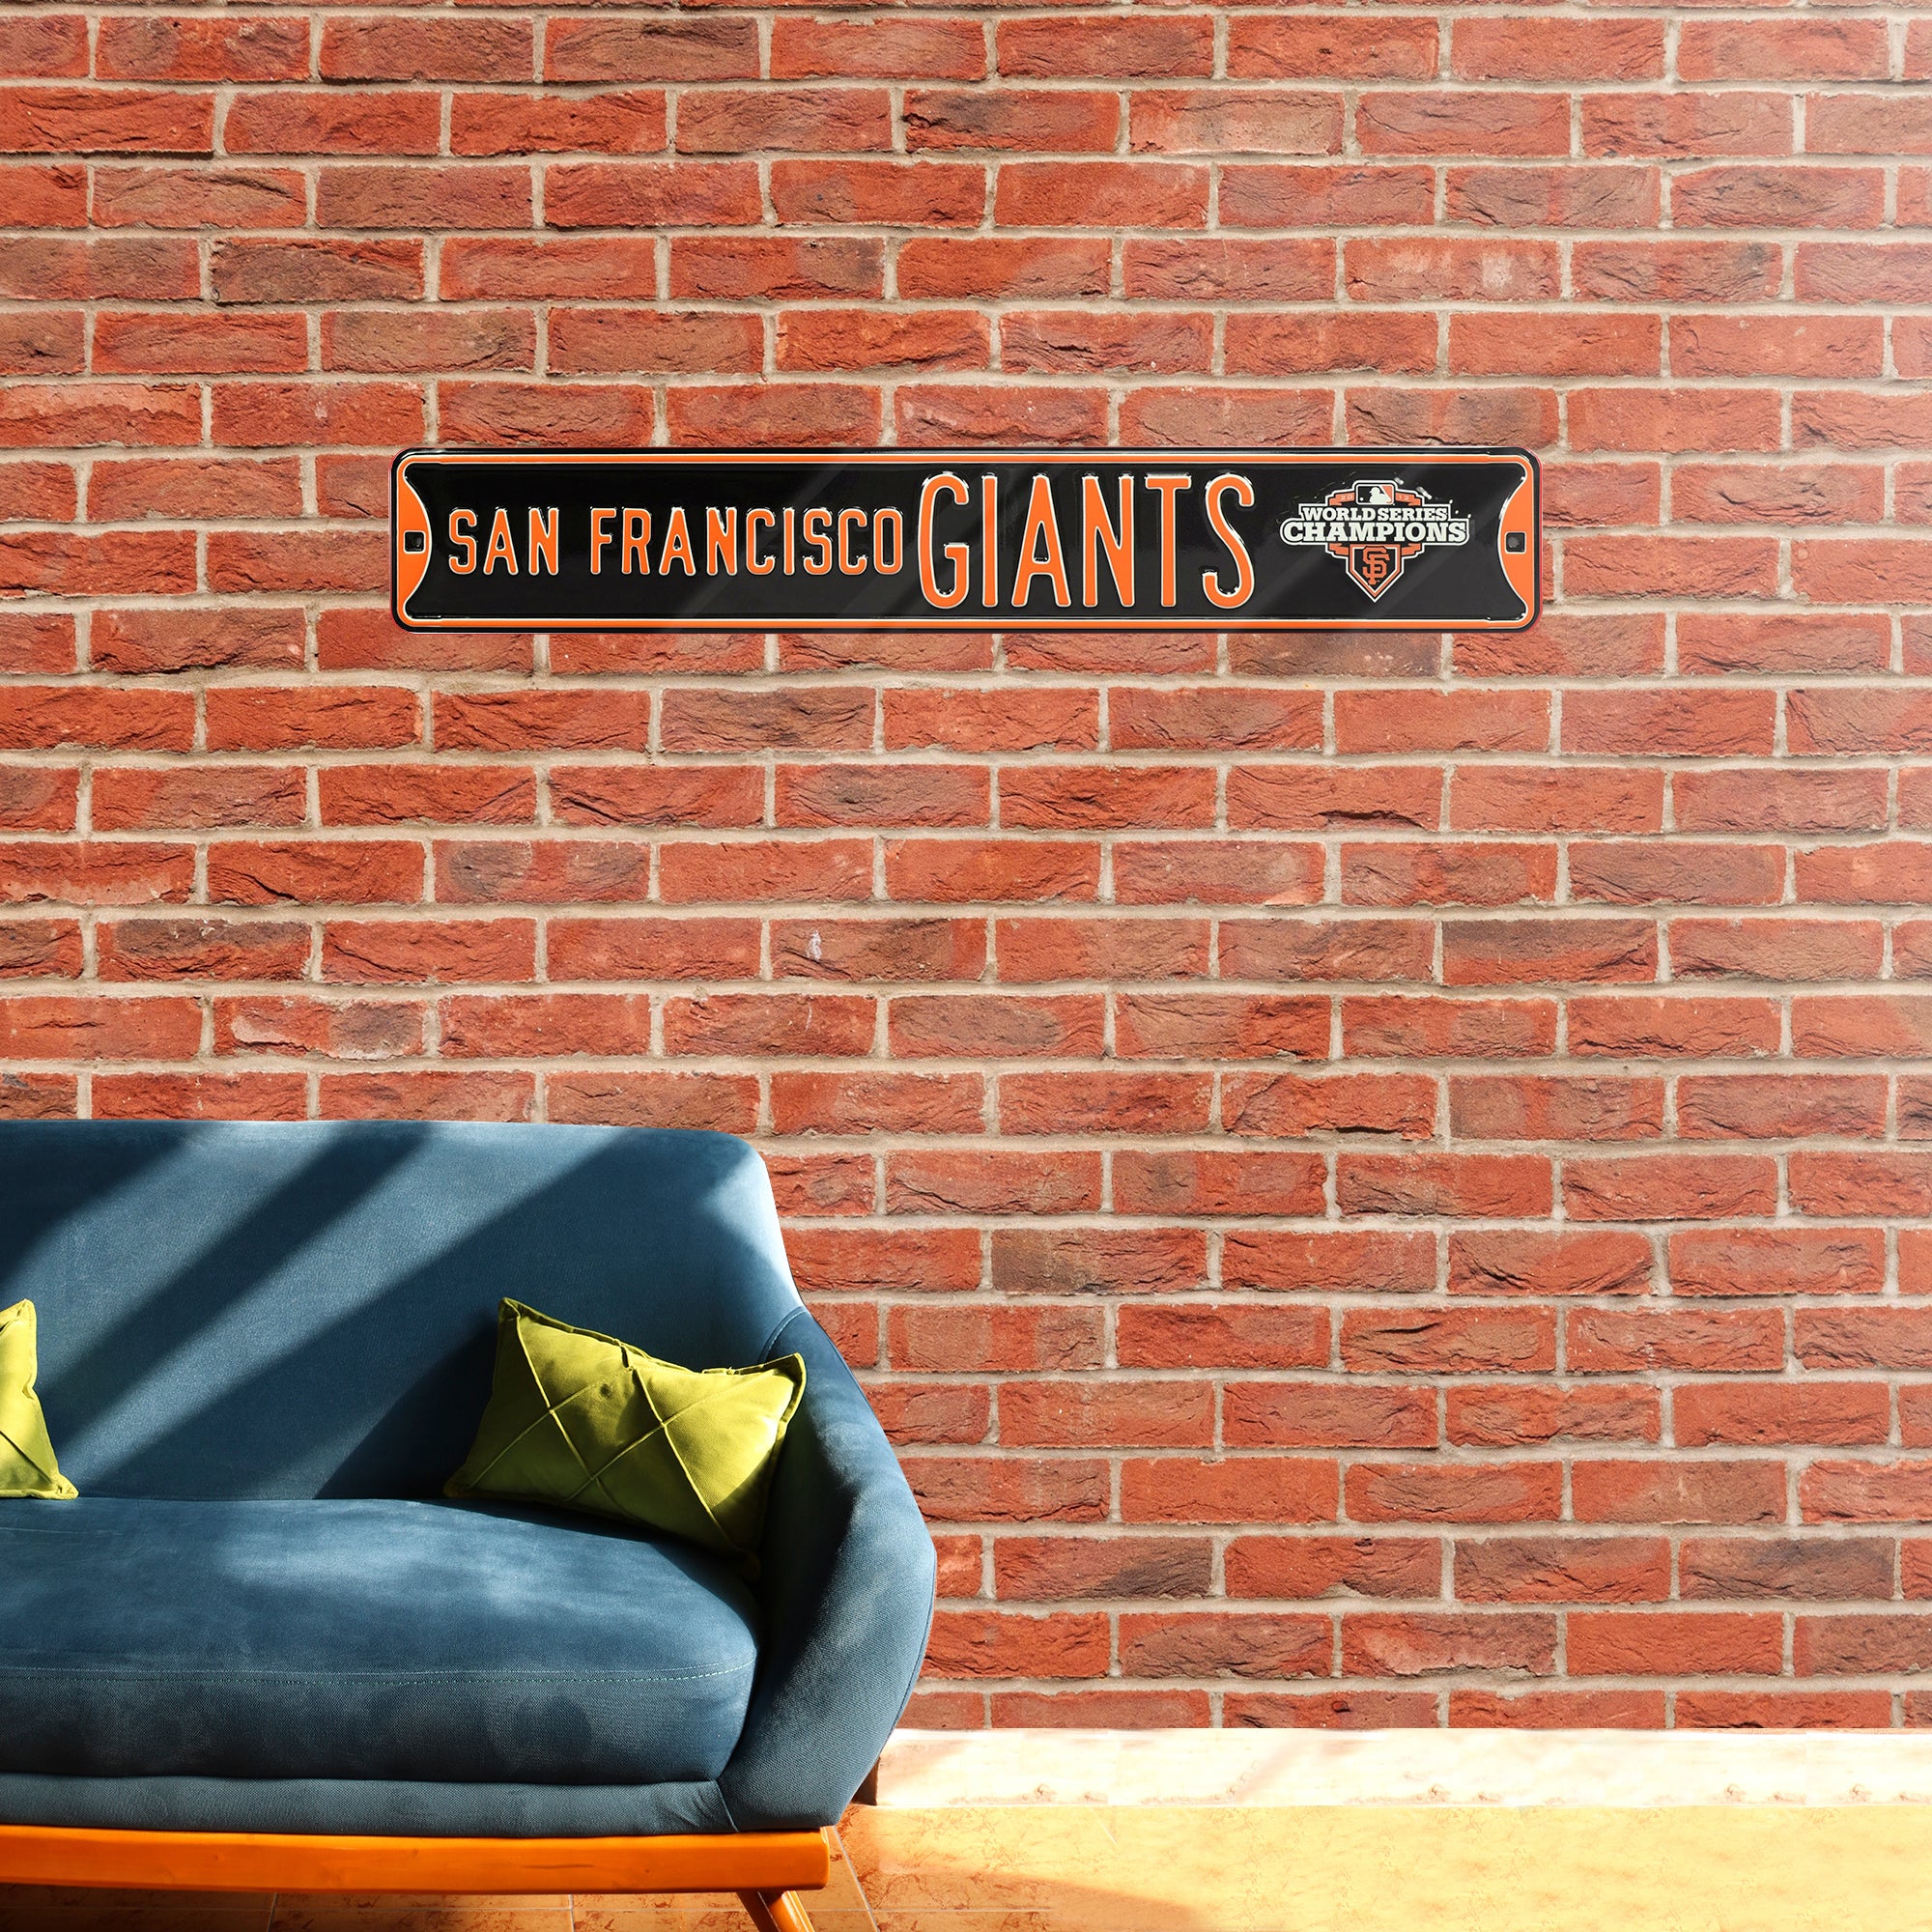 San Francisco Giants Steel Street Sign with Logo-WS 2012 Champions 36" W x 6" H by Fathead